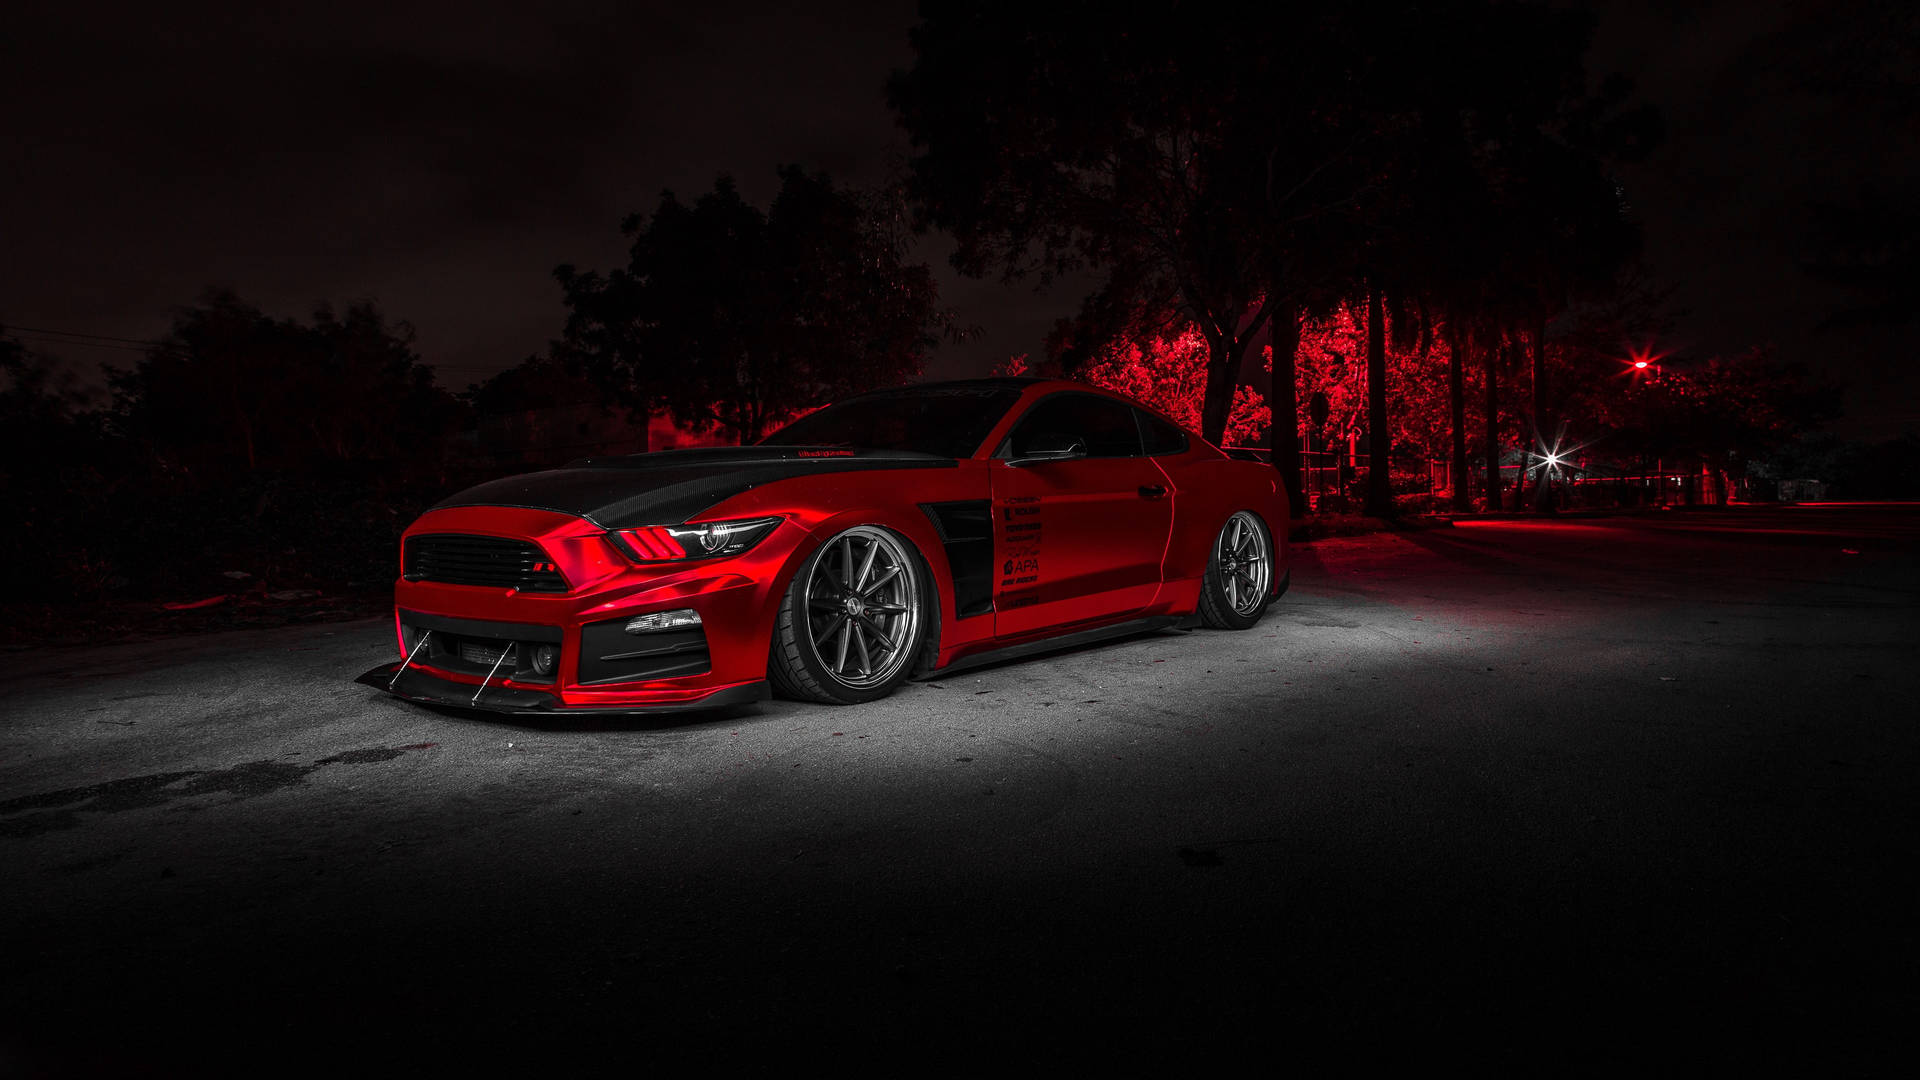 4k Ultra Hd Mustang Vibrant Red Background